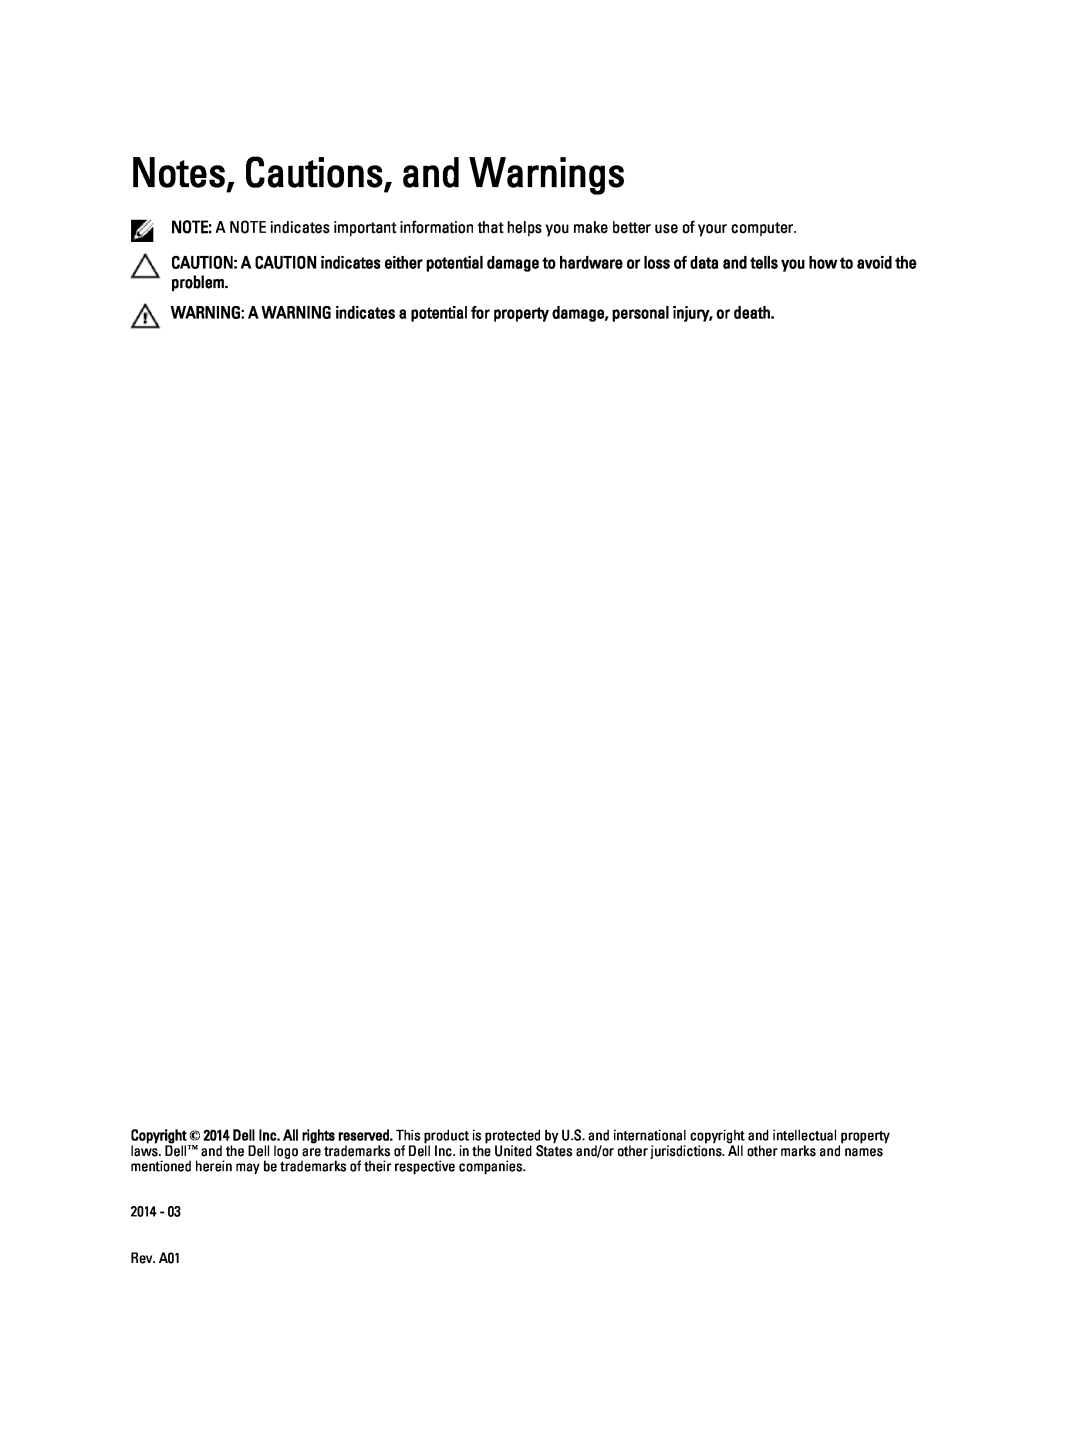 Dell T5610 owner manual Notes, Cautions, and Warnings 